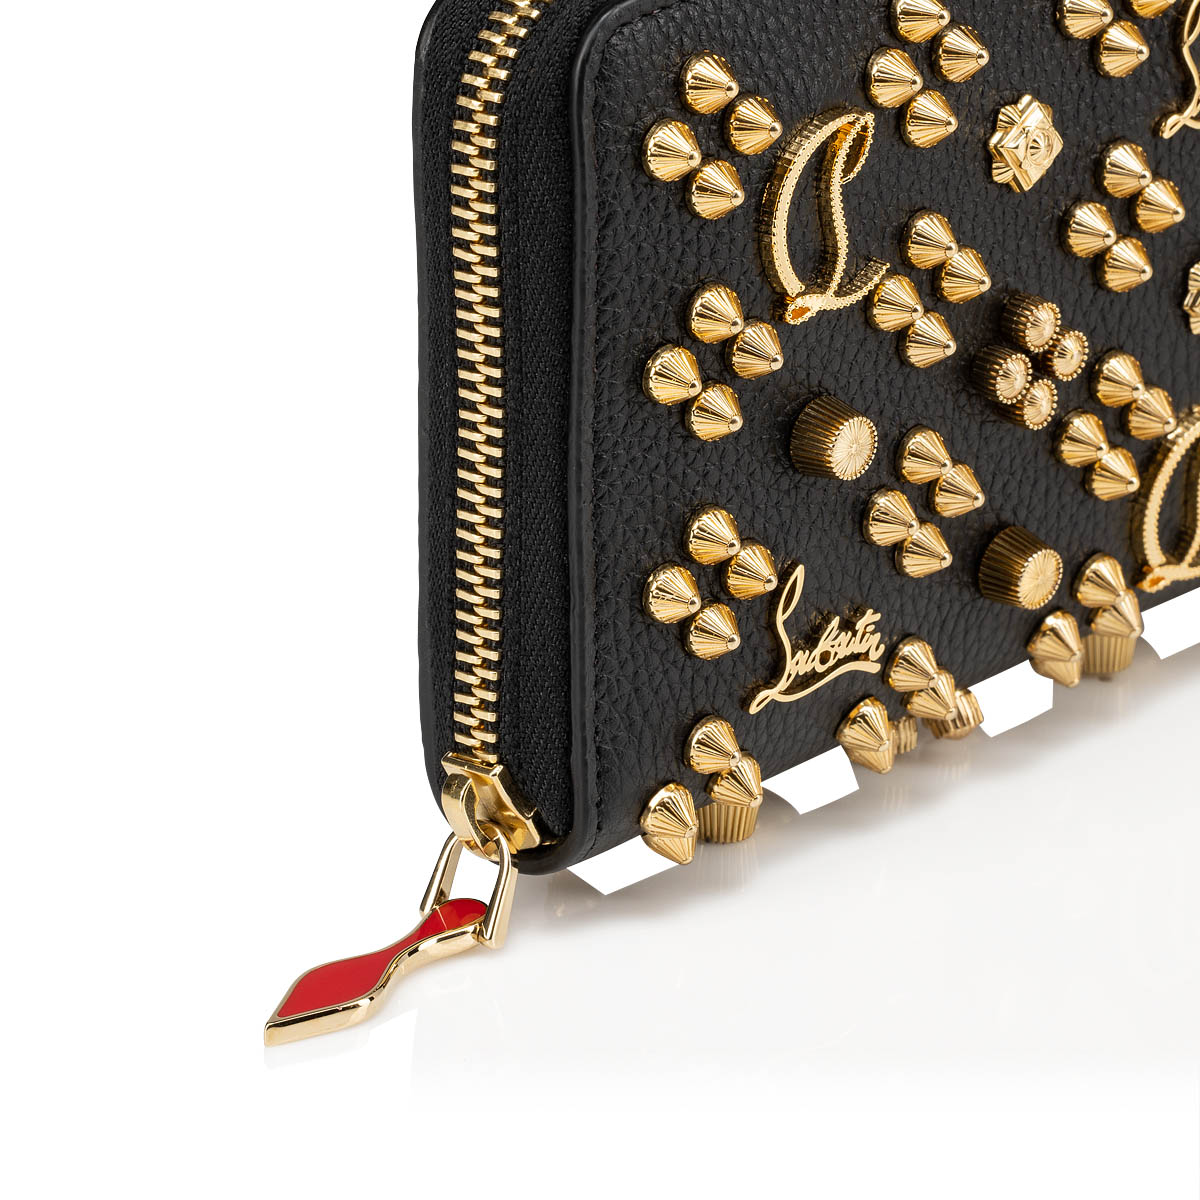 CHRISTIAN LOUBOUTIN: Panettone wallet with spikes - Black